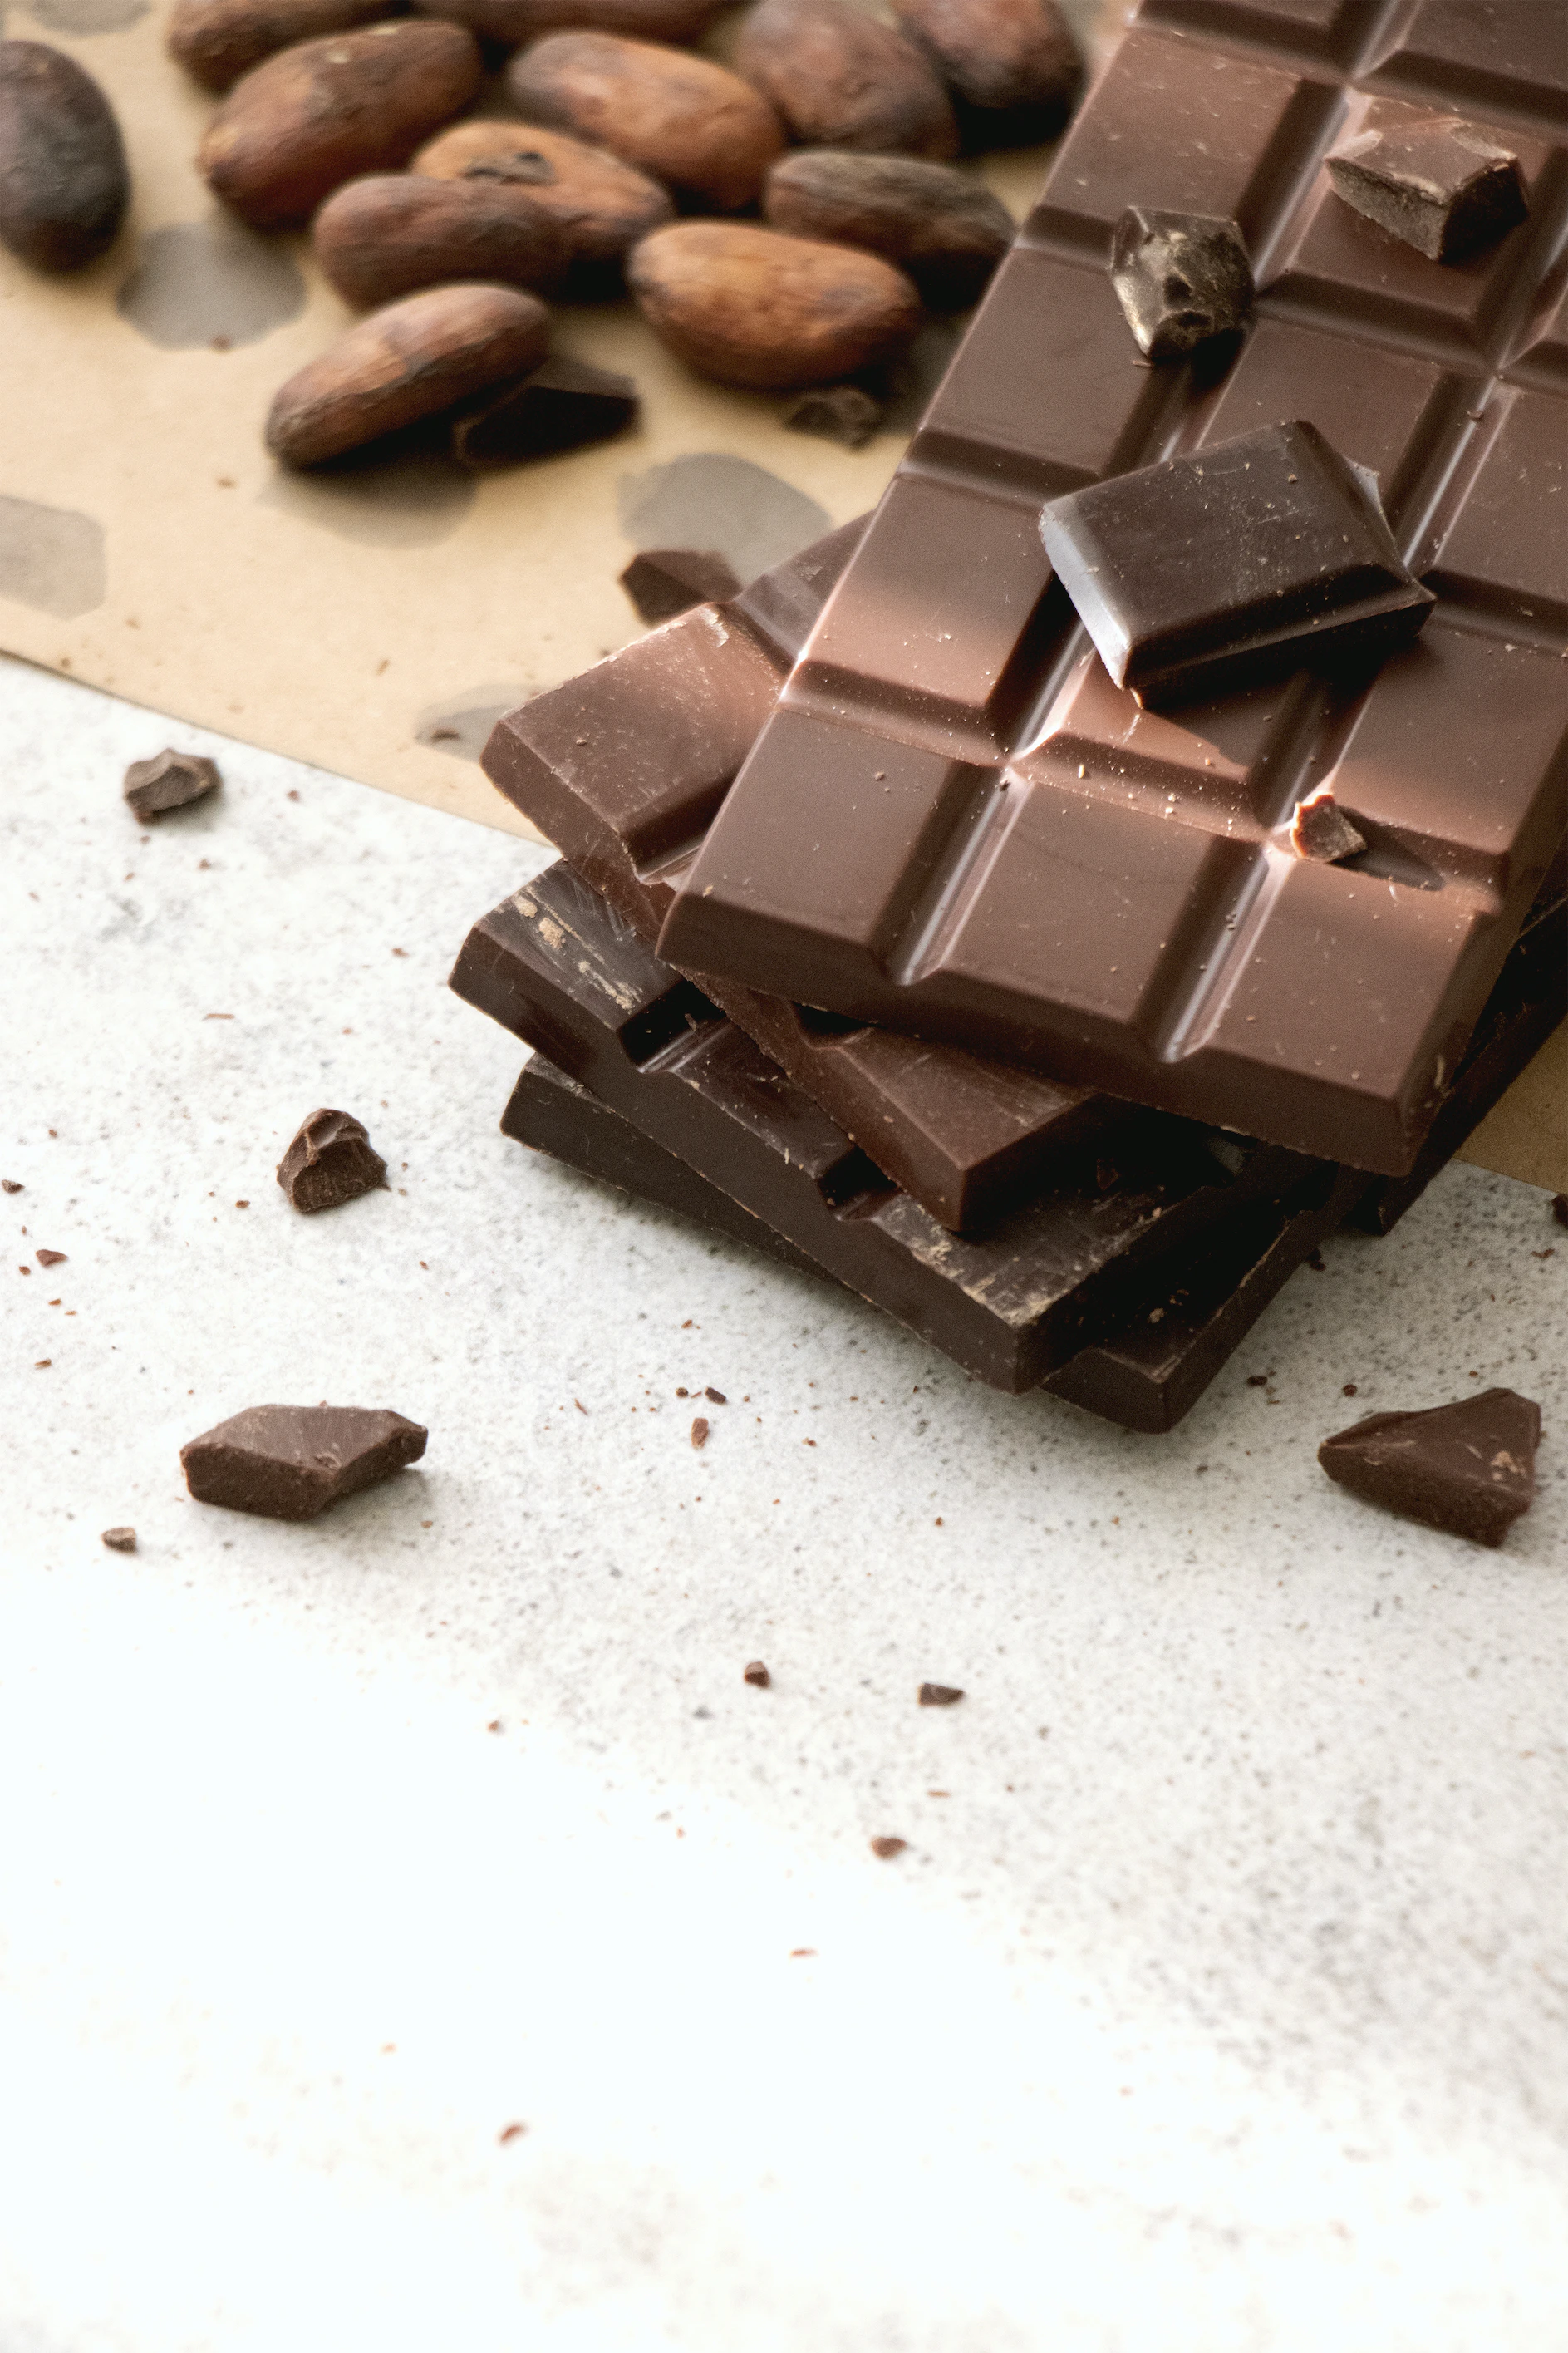 Chocolate Science: Learn More about the Science of Chocolate